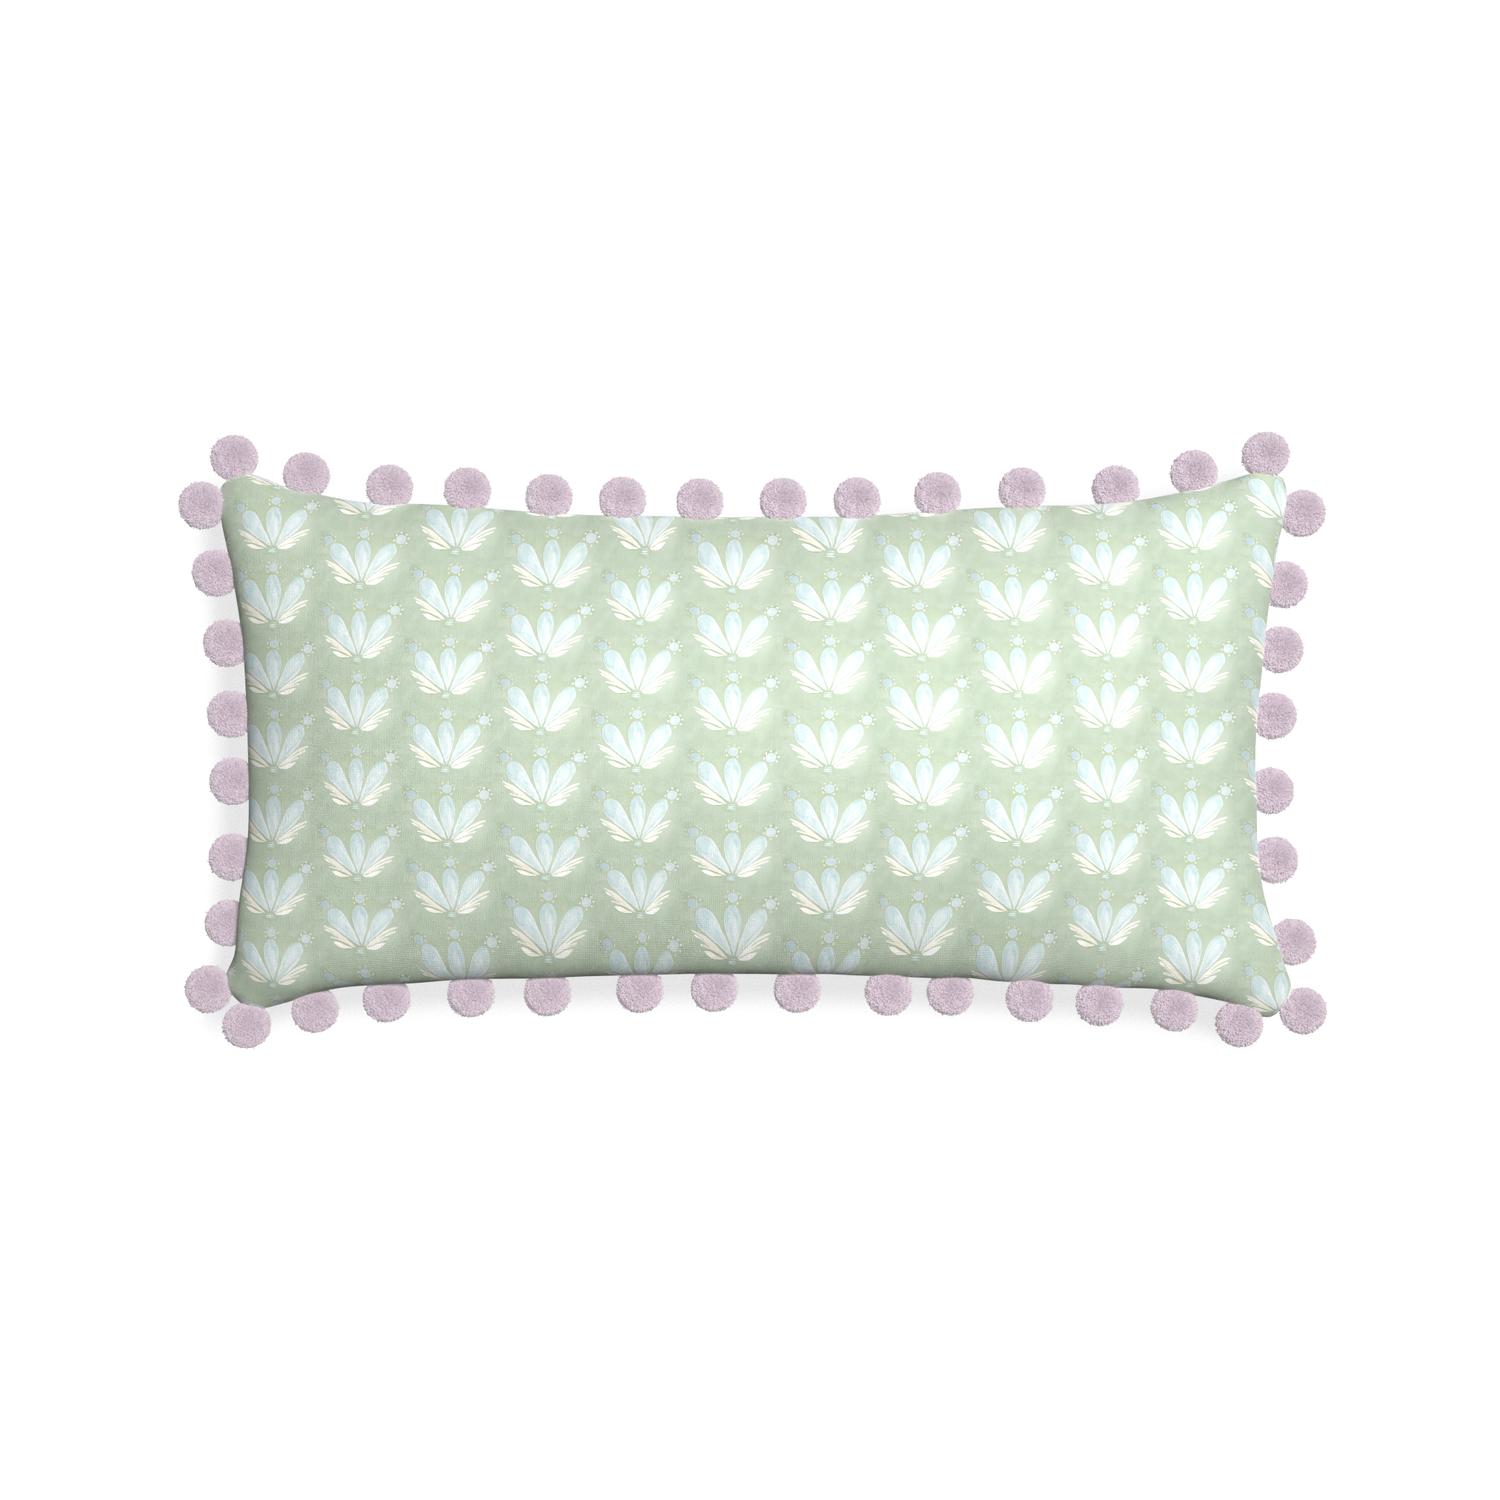 Midi-lumbar serena sea salt custom blue & green floral drop repeatpillow with l on white background